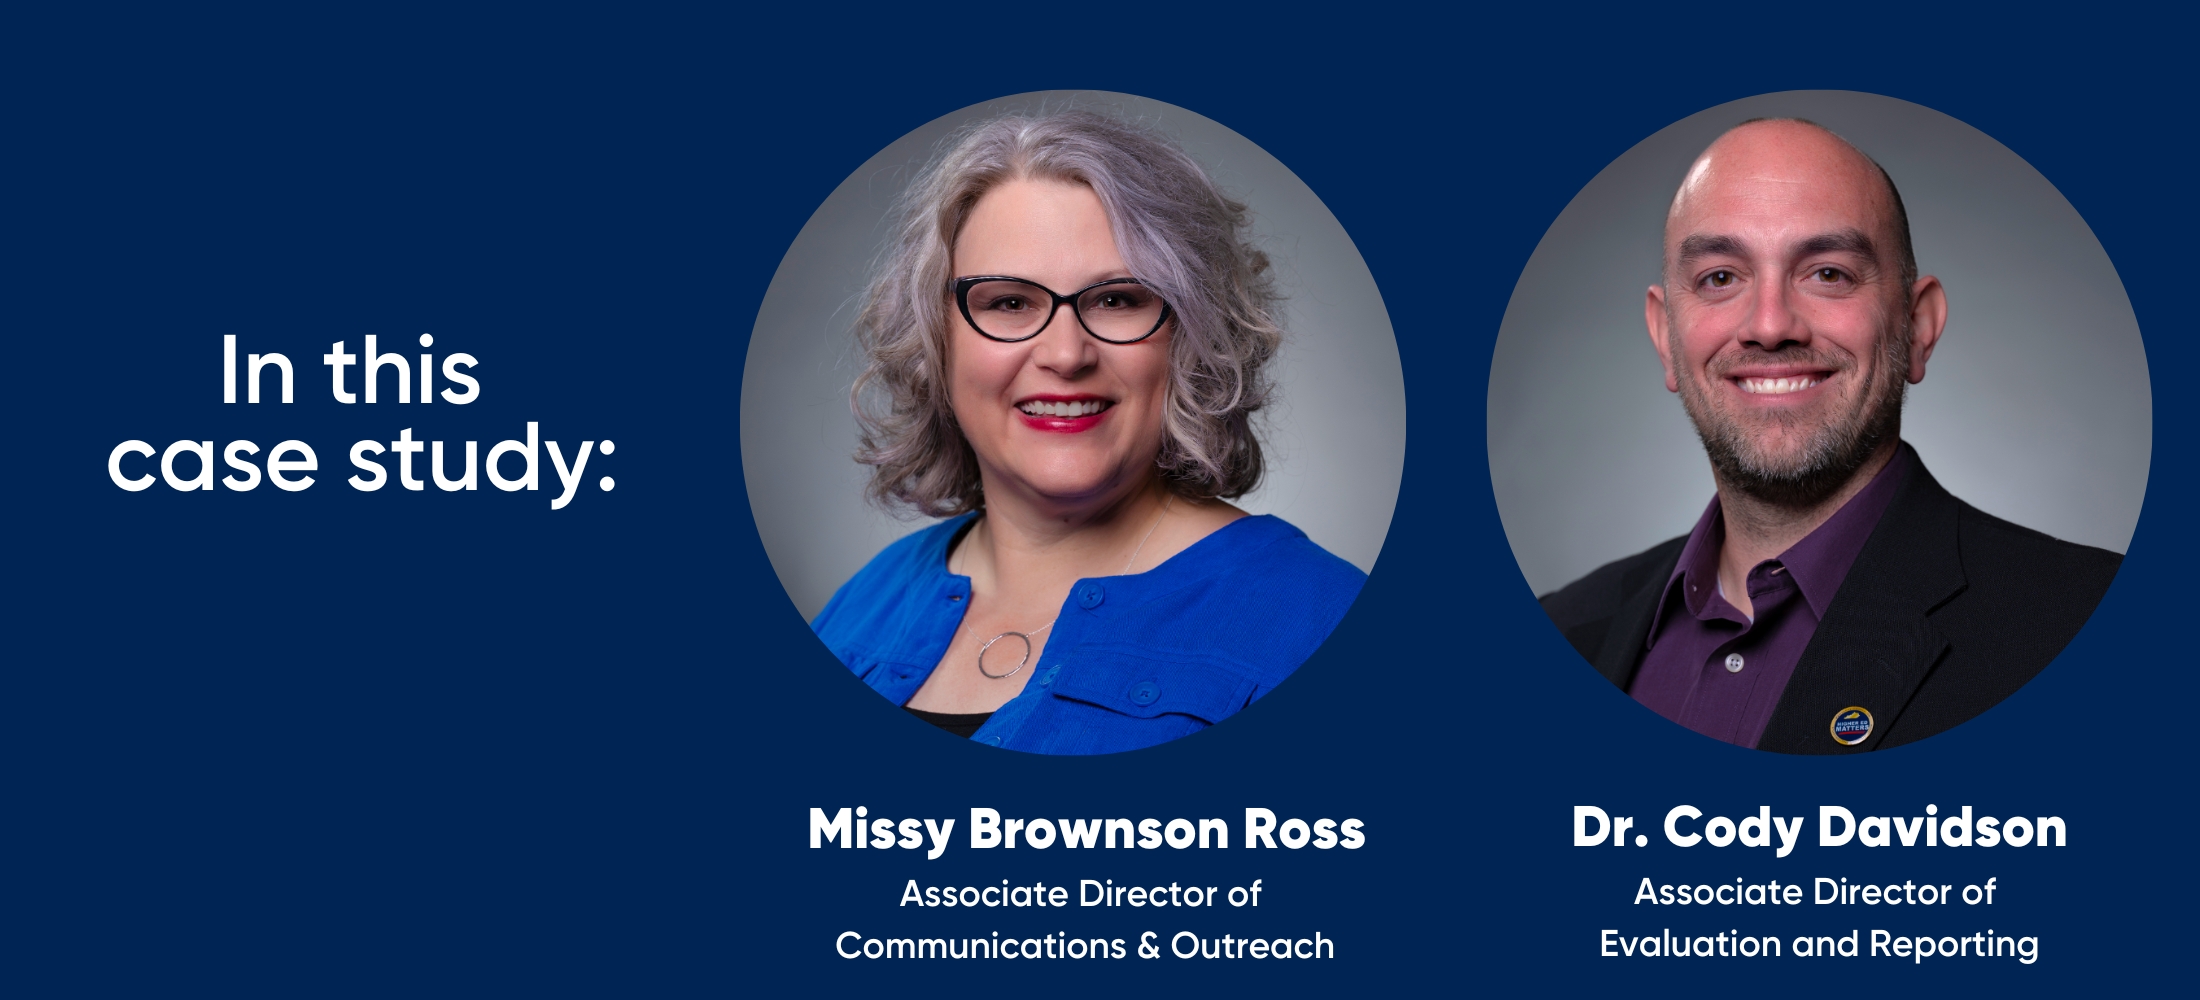 in this case study: Missy Brownson Ross, Associate Director of  Communications & Outreach and Dr. Cody Davidson, Associate Director of  Evaluation and Reporting 